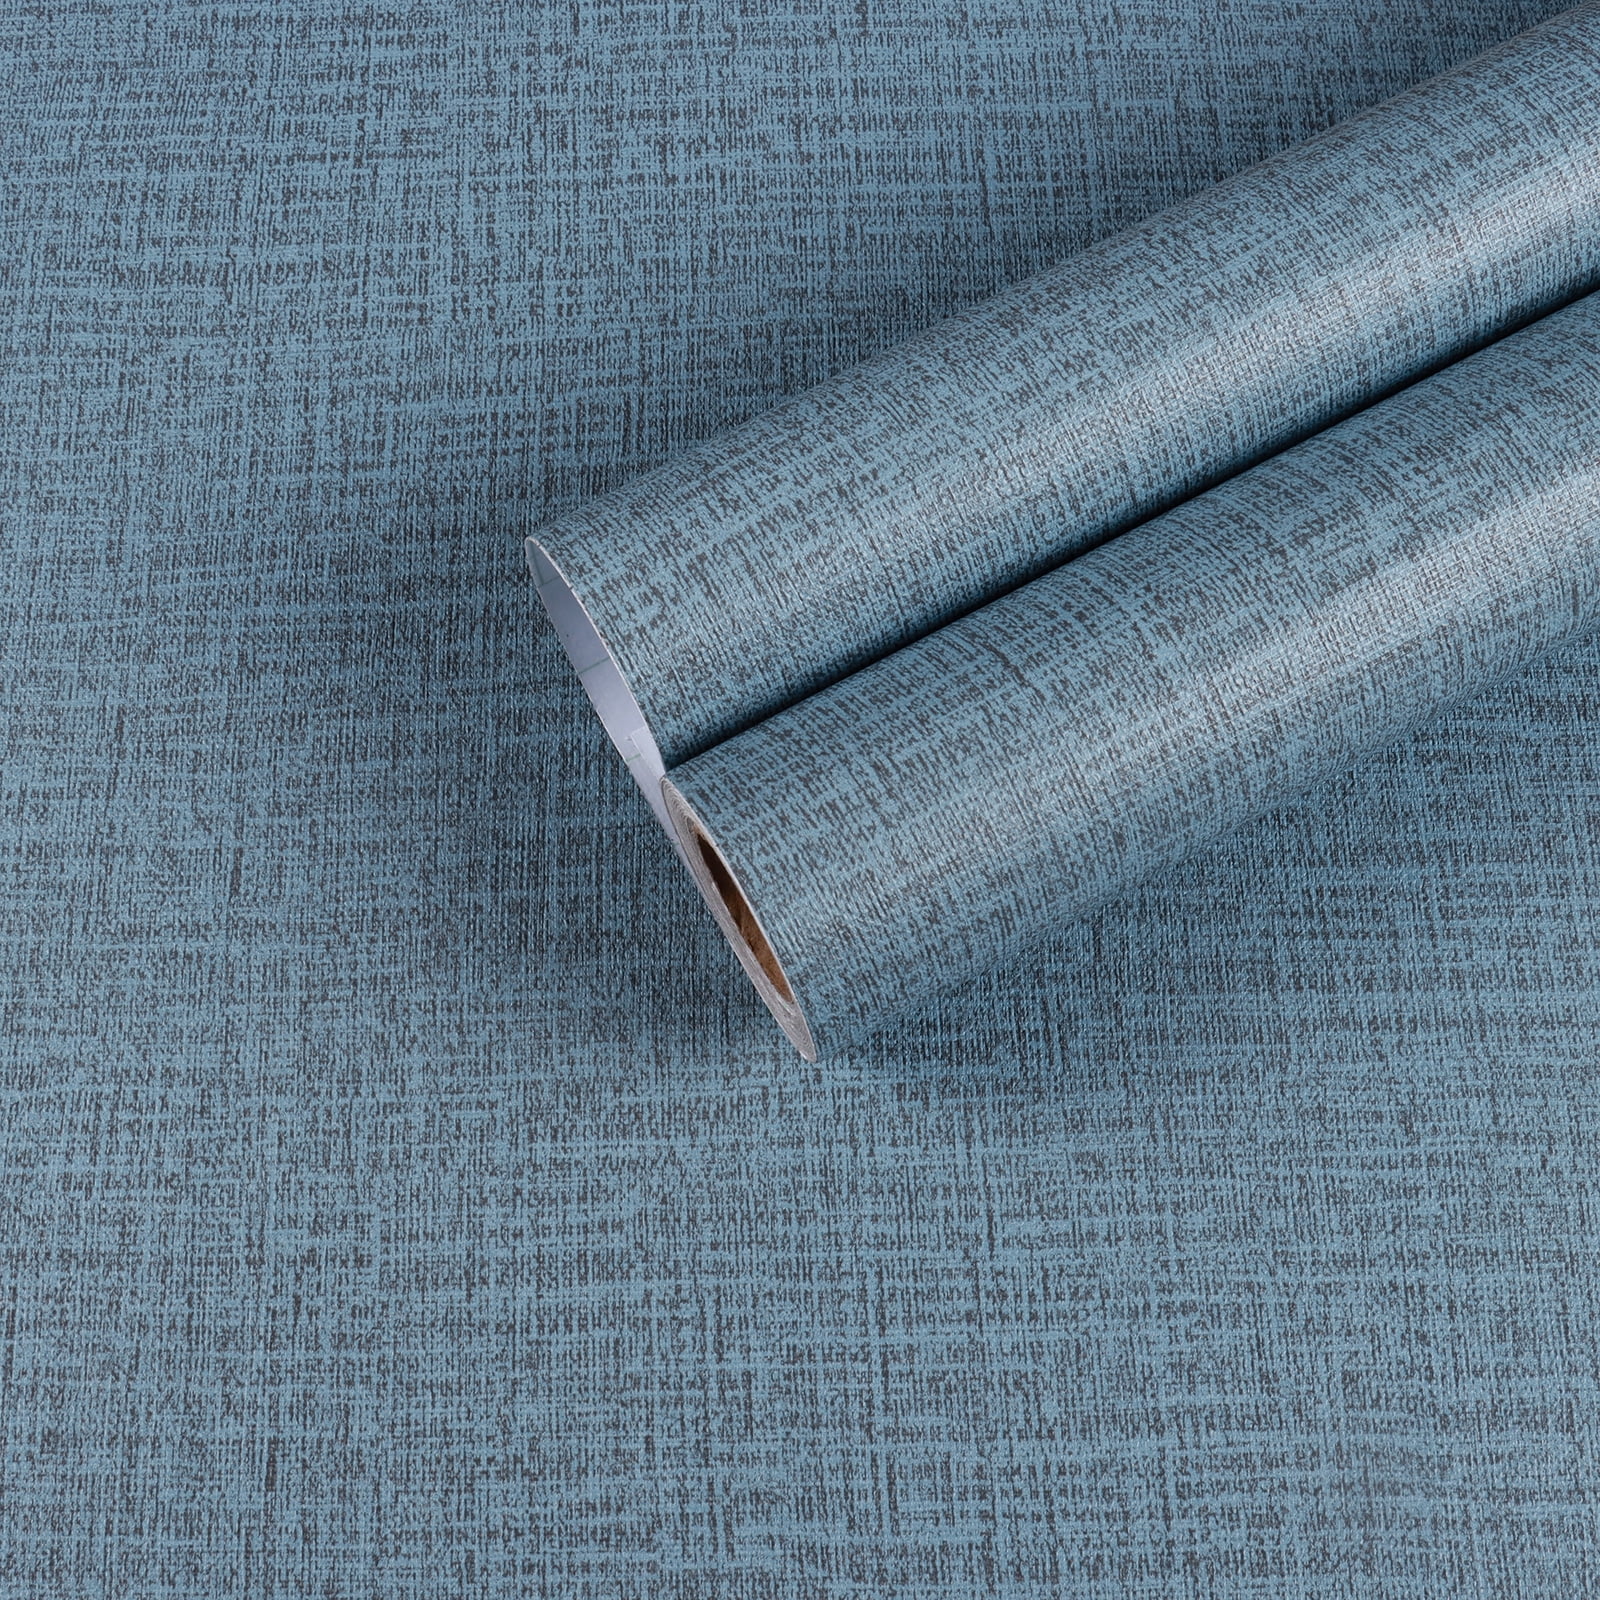 Tempaper 56sq ft Chambray Vinyl Textured Grasscloth SelfAdhesive Peel and Stick  Wallpaper in the Wallpaper department at Lowescom